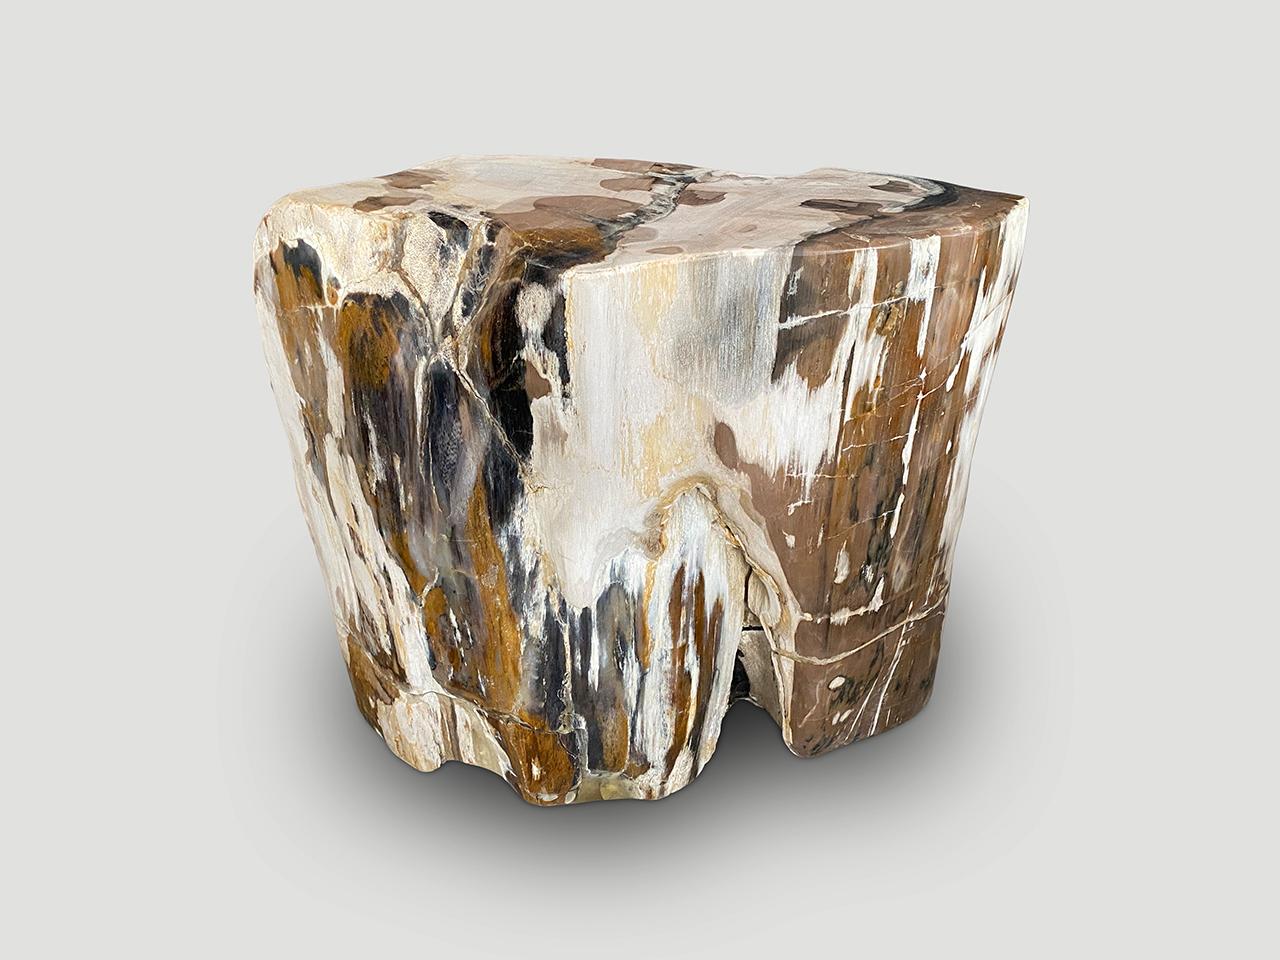 Impressive ancient petrified wood side table. It’s fascinating how Mother Nature produces these stunning 40 million year old petrified teak logs with such contrasting colors and natural patterns throughout. This one has the rock formation on one